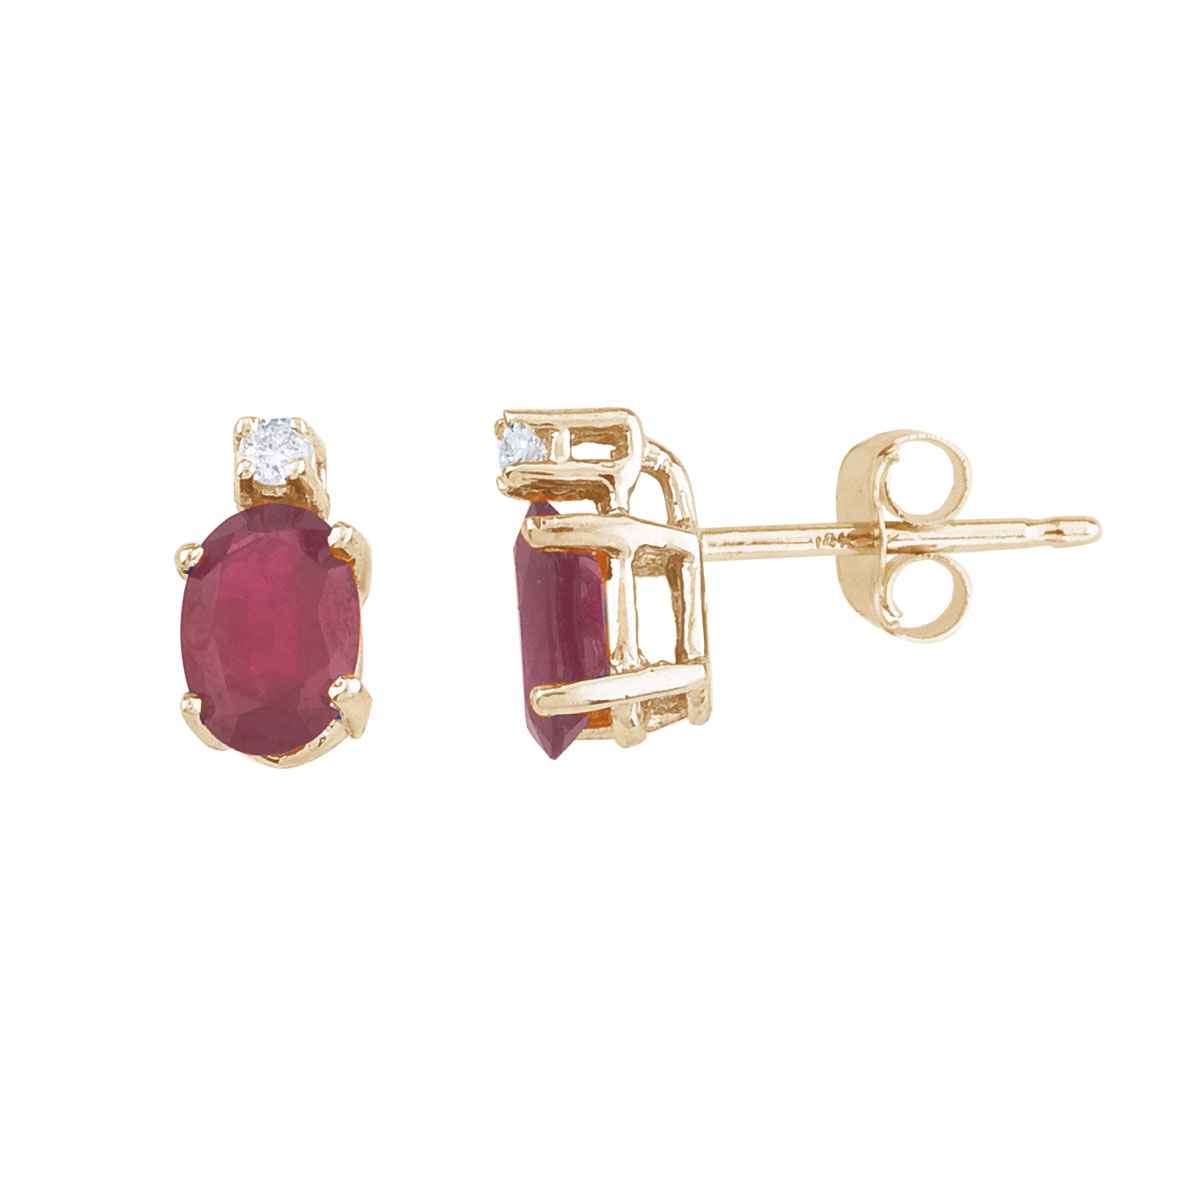 JCX2315: These 6x4 mm oval ruby earrings are set in beautiful 14k yellow gold and feature .04 total carat diamonds.